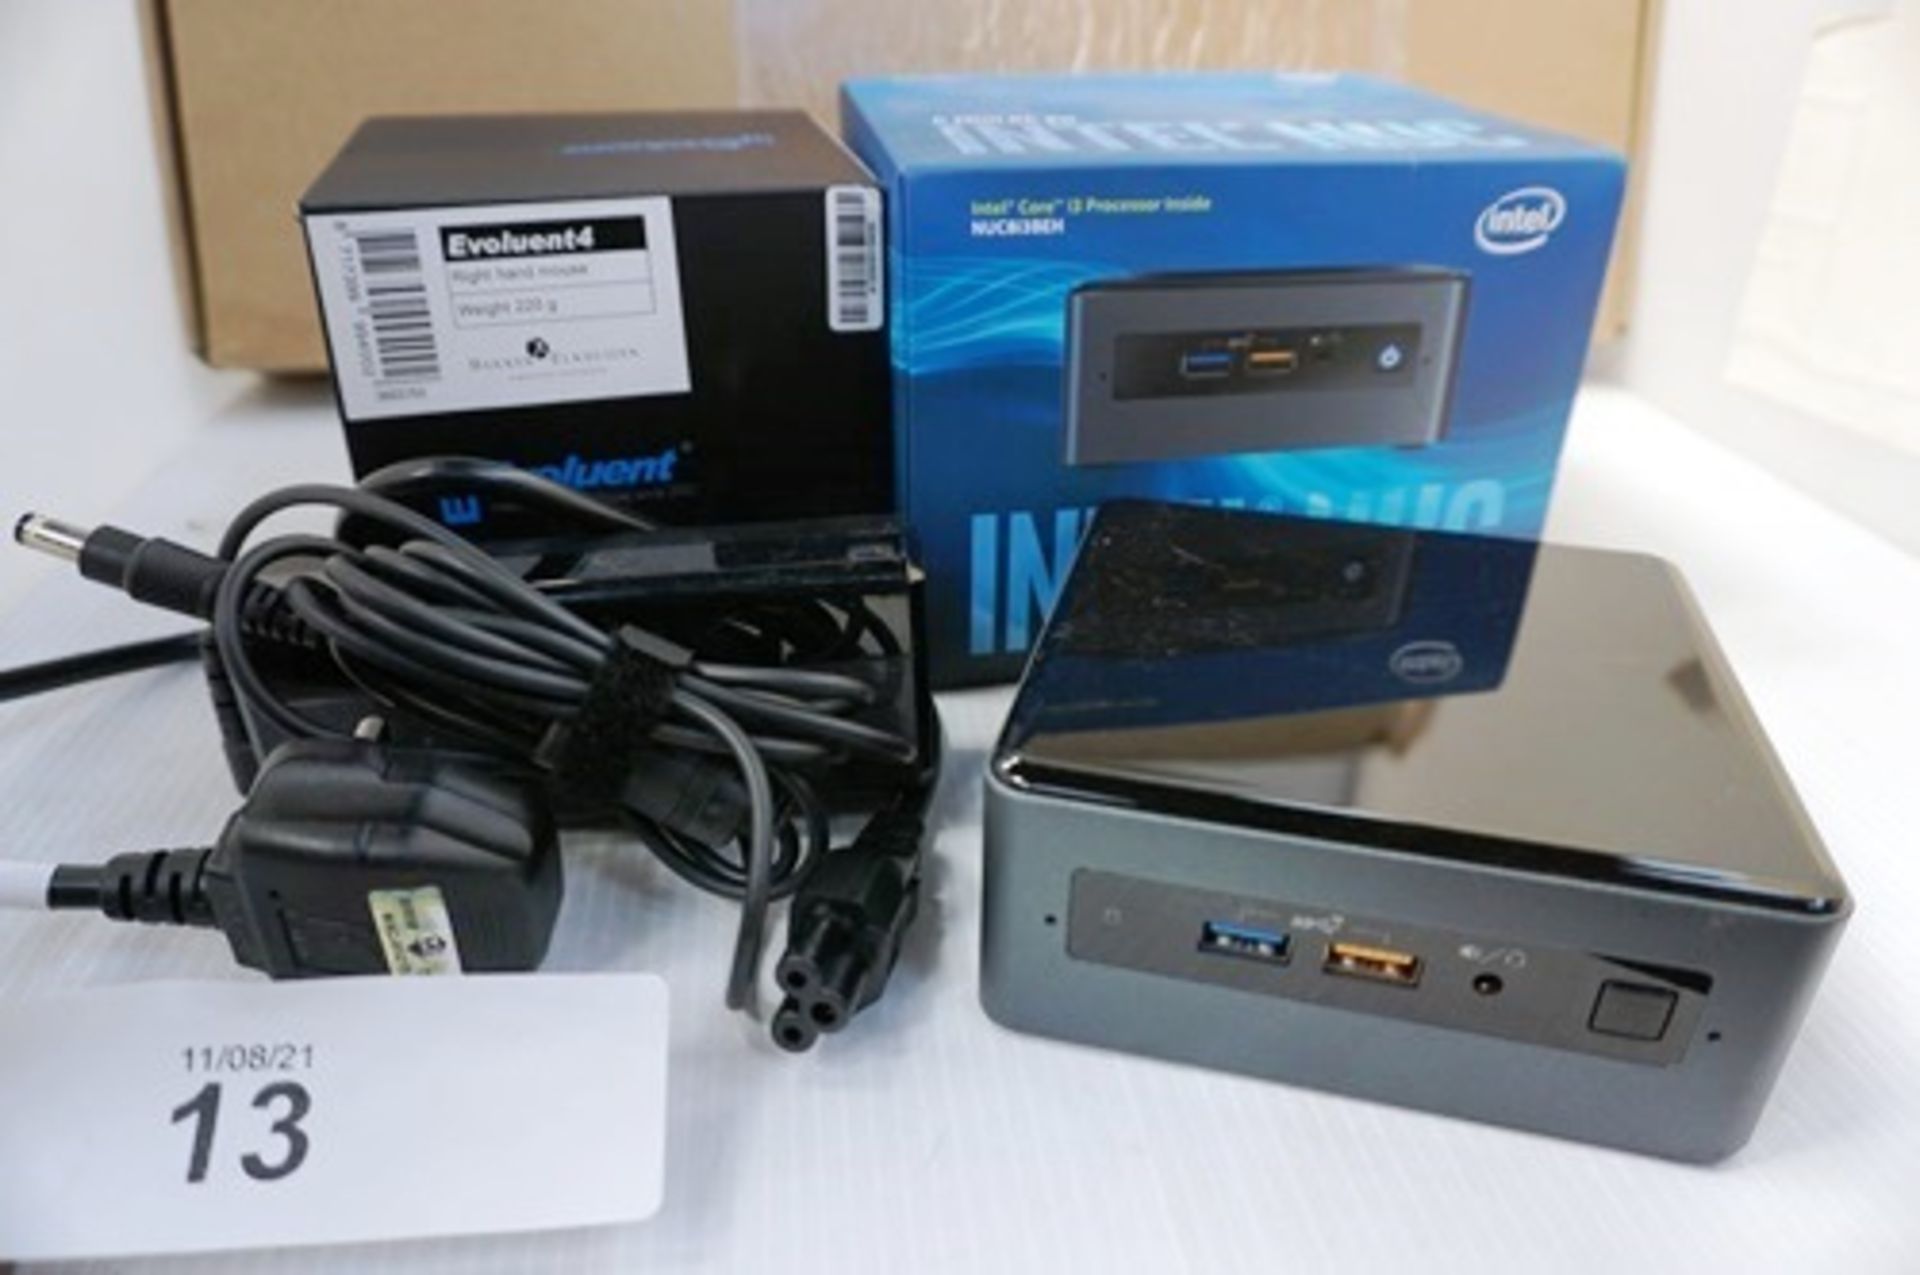 1 x Intel NUC 8 i3 mini PC, model NOC813B, factory reset, second-hand, together with 1 x Evoluent - Image 6 of 7